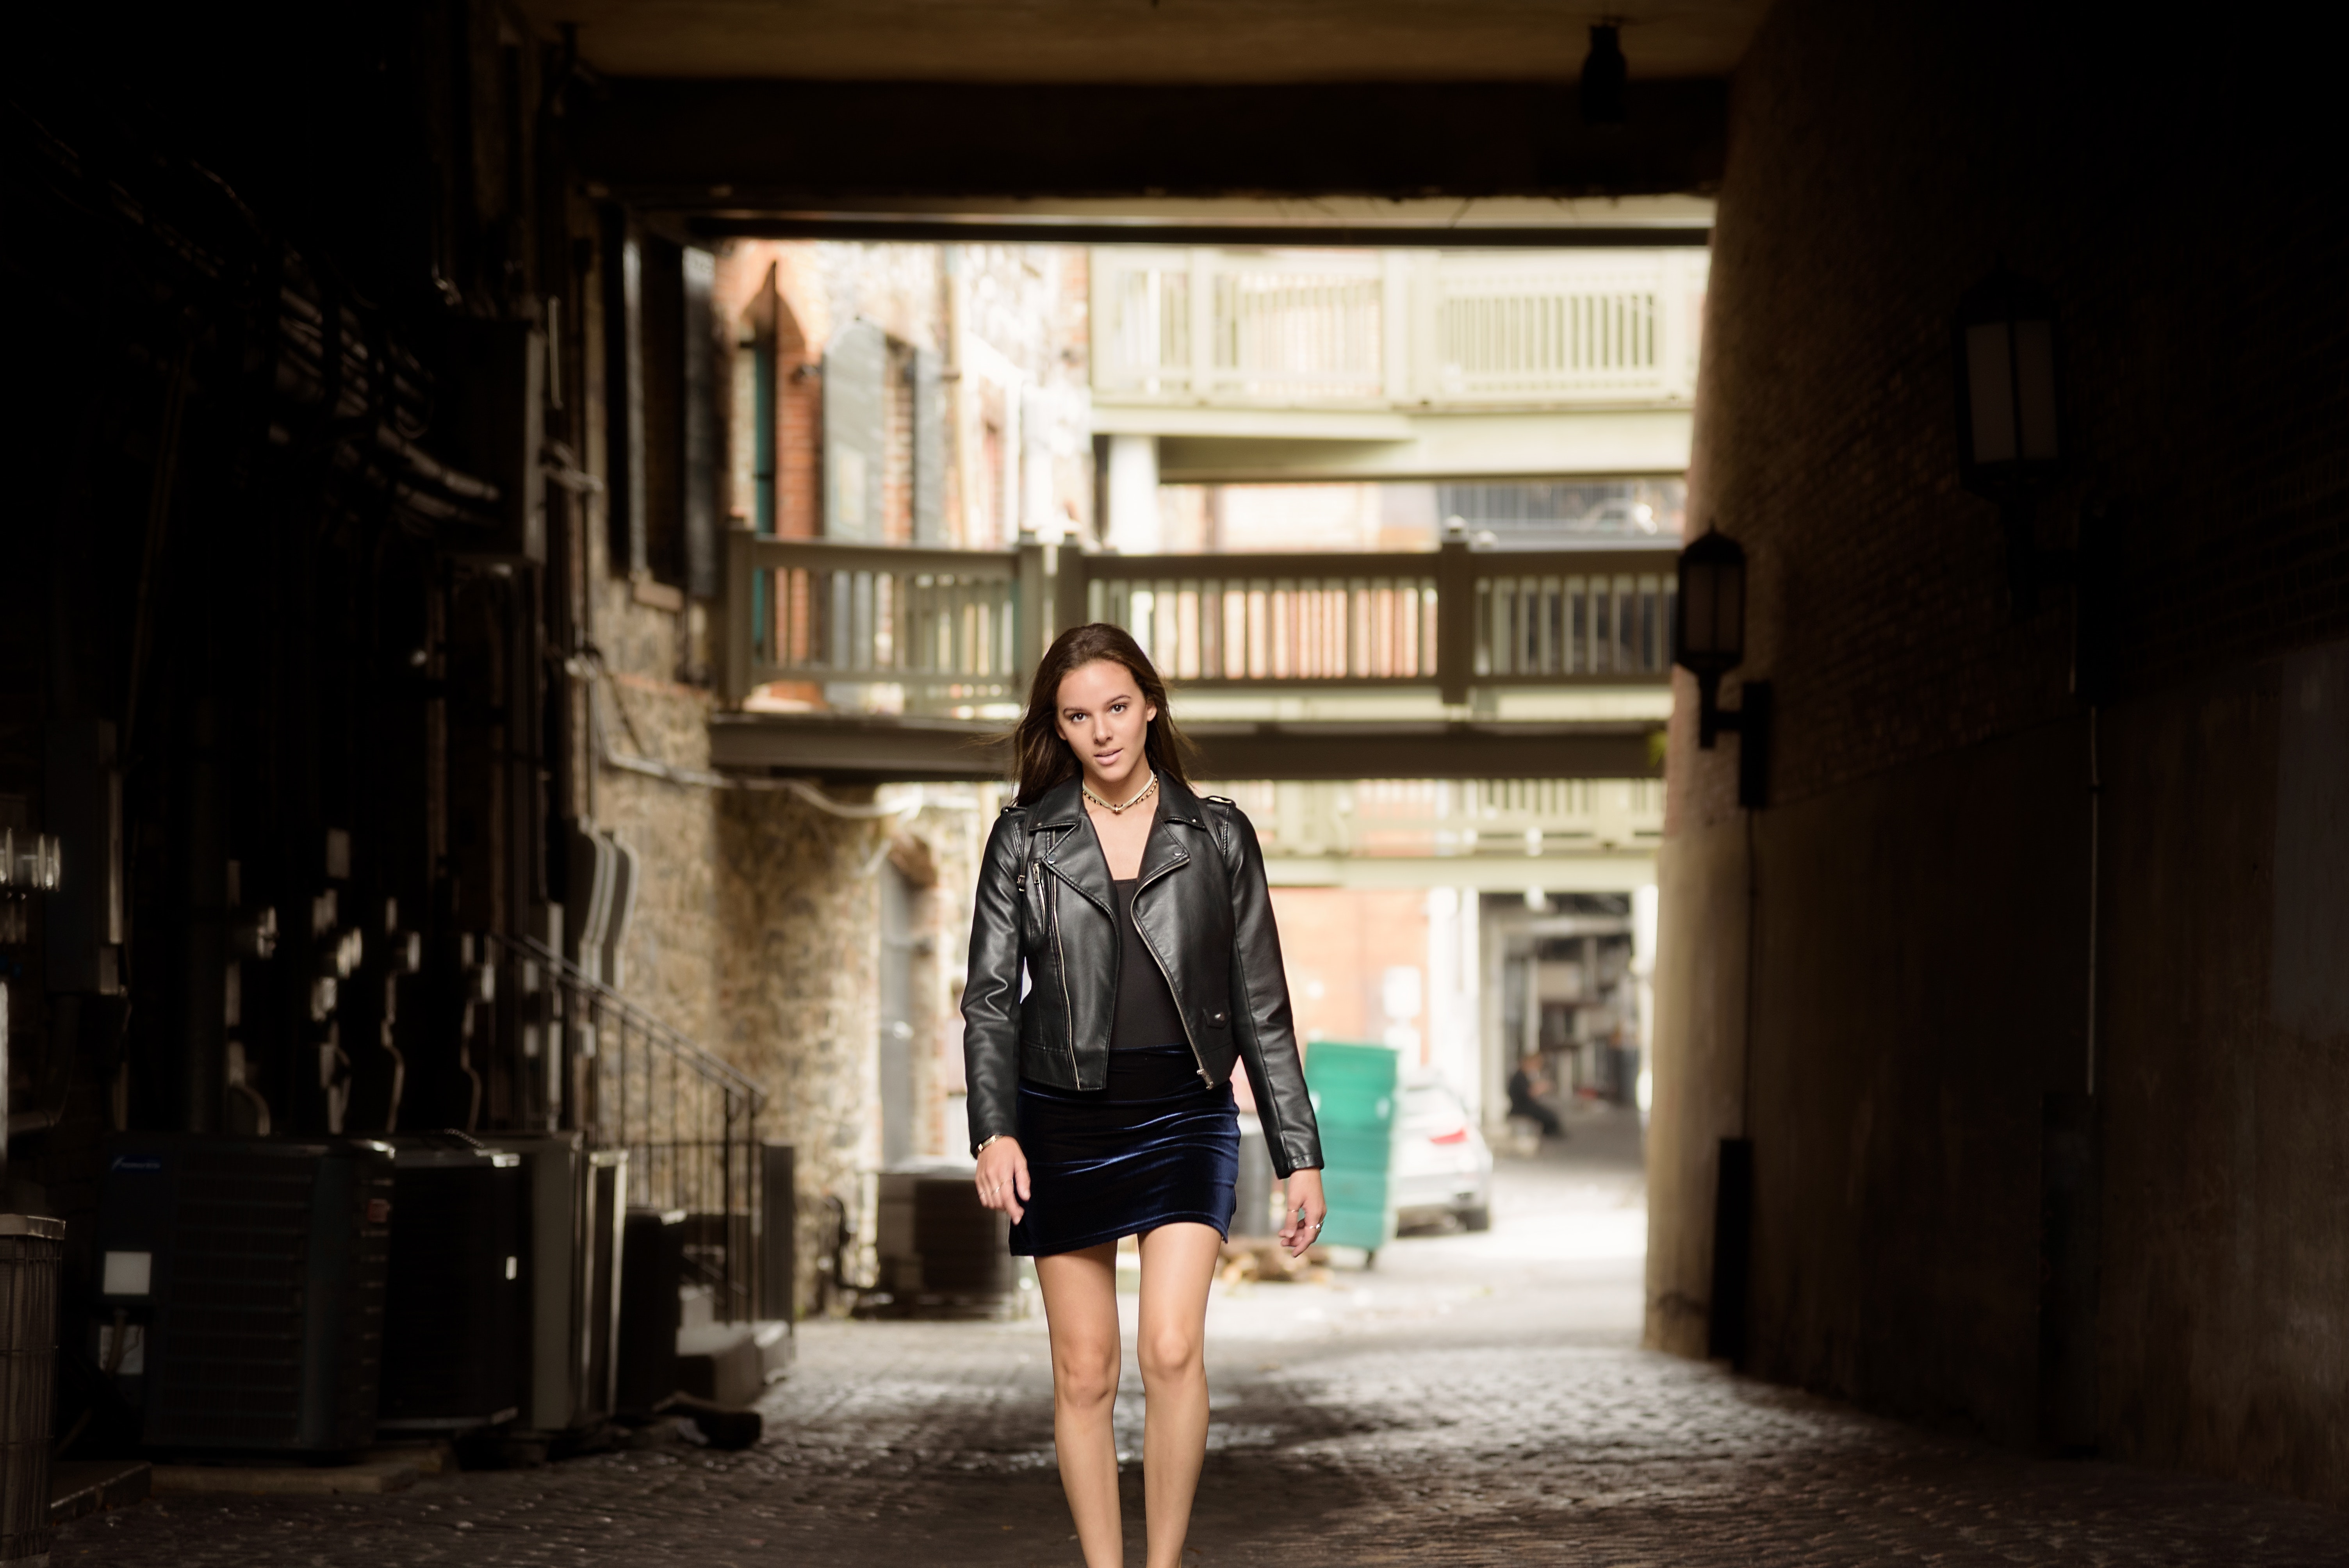 Woman in Black Leather Jacket and Skirt, Alley, Person, Window, Wear, HQ Photo